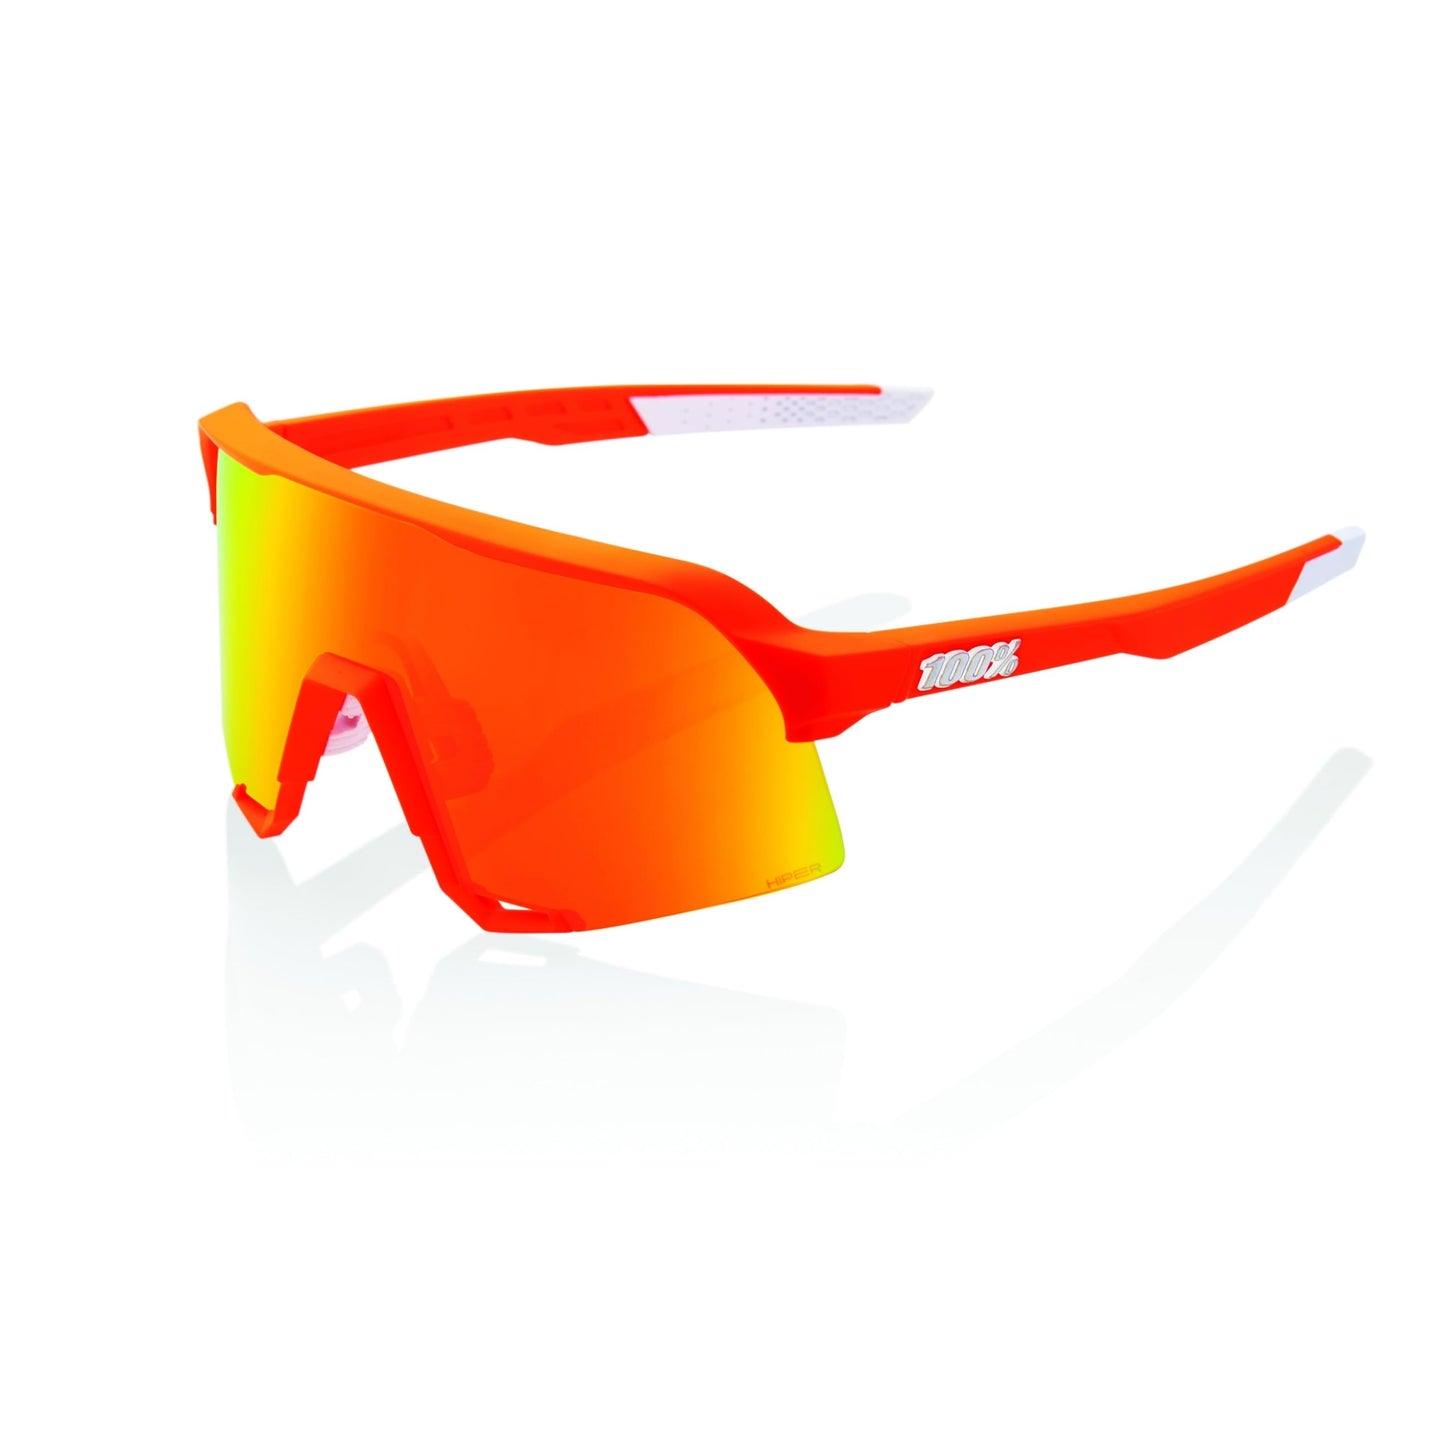 Ride 100 S3 Soft Tact Neon Orange - HiPER Red Multilayer Mirror Lens